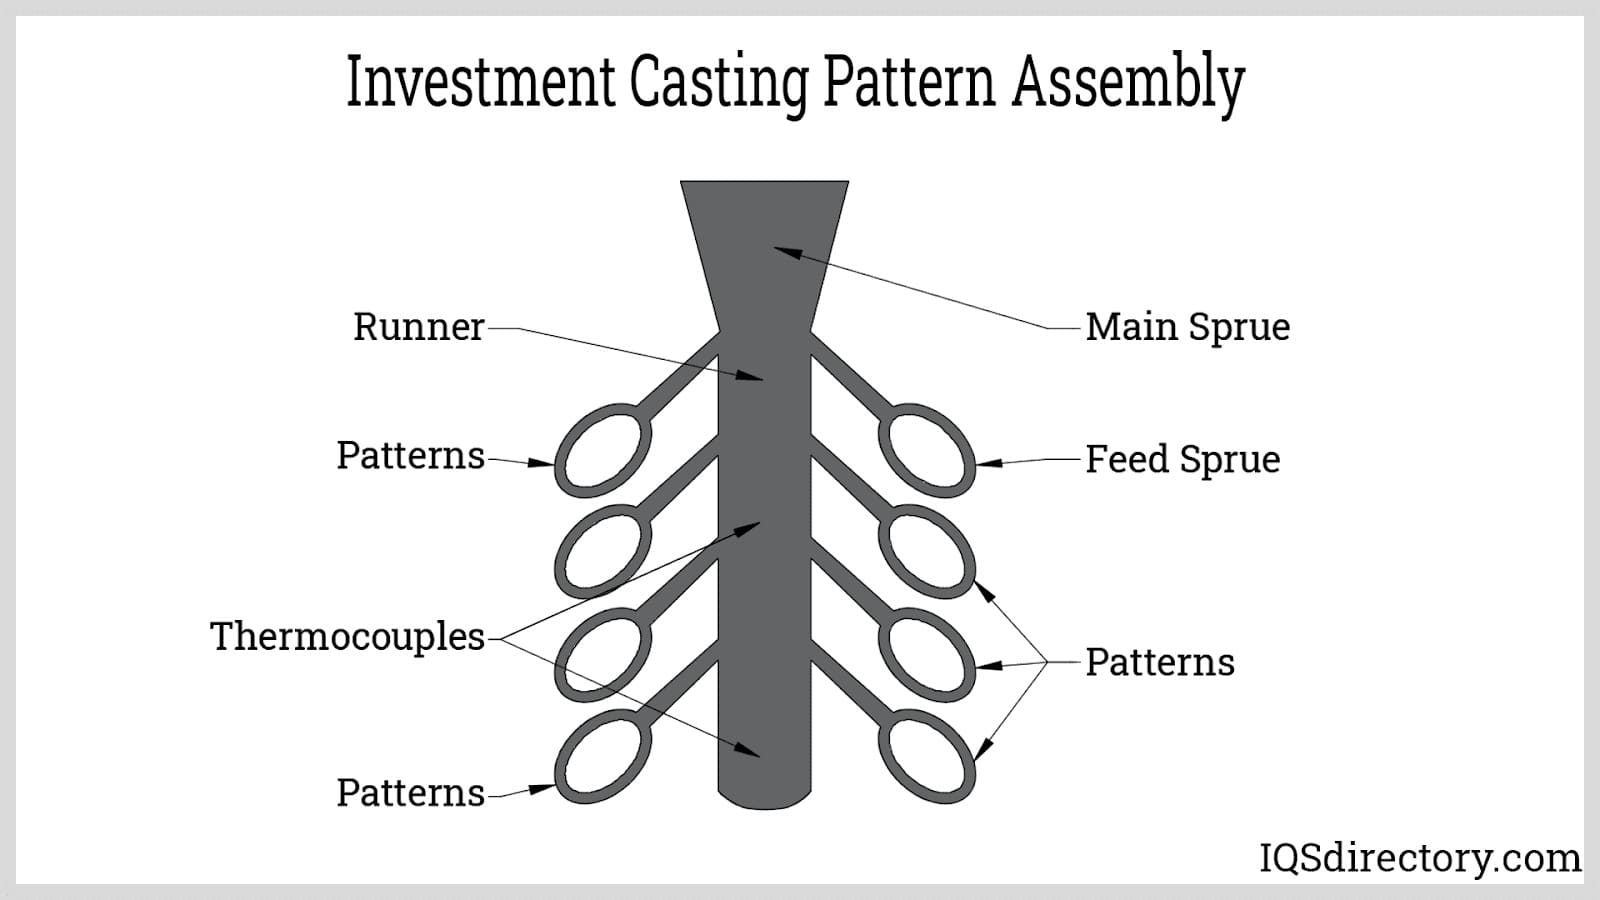 Investment Casting Pattern Assembly